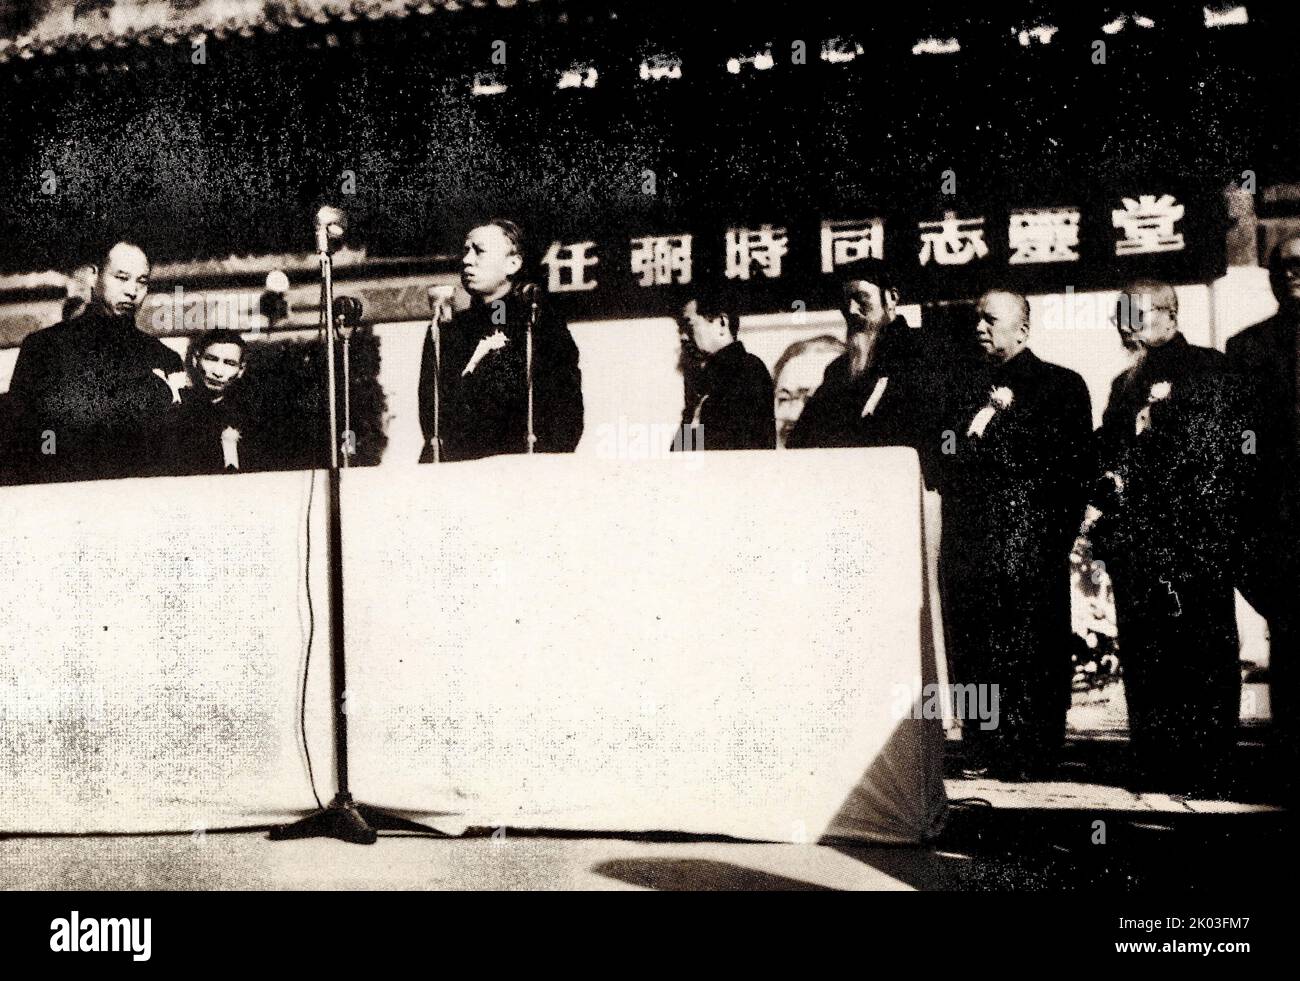 Party and state leaders at Ren Bishi's memorial meeting. From left: Peng Zhen, Chen Yun, Liu Shaoqi, Zhou Enlai, Zhang Lan, Li Jishen, Chen Tong, Liu Bocheng. The conference was chaired by Peng Zhen, a member of the Political Bureau of the CPC Central Committee, and Liu Shaoqi. After the memorial meeting, Ren Bishi's coffin was moved to the Babaoshan Revolutionary Cemetery. Ren Bishi was a military and political leader in the early Chinese Communist Party. In the early 1930s, Stock Photo